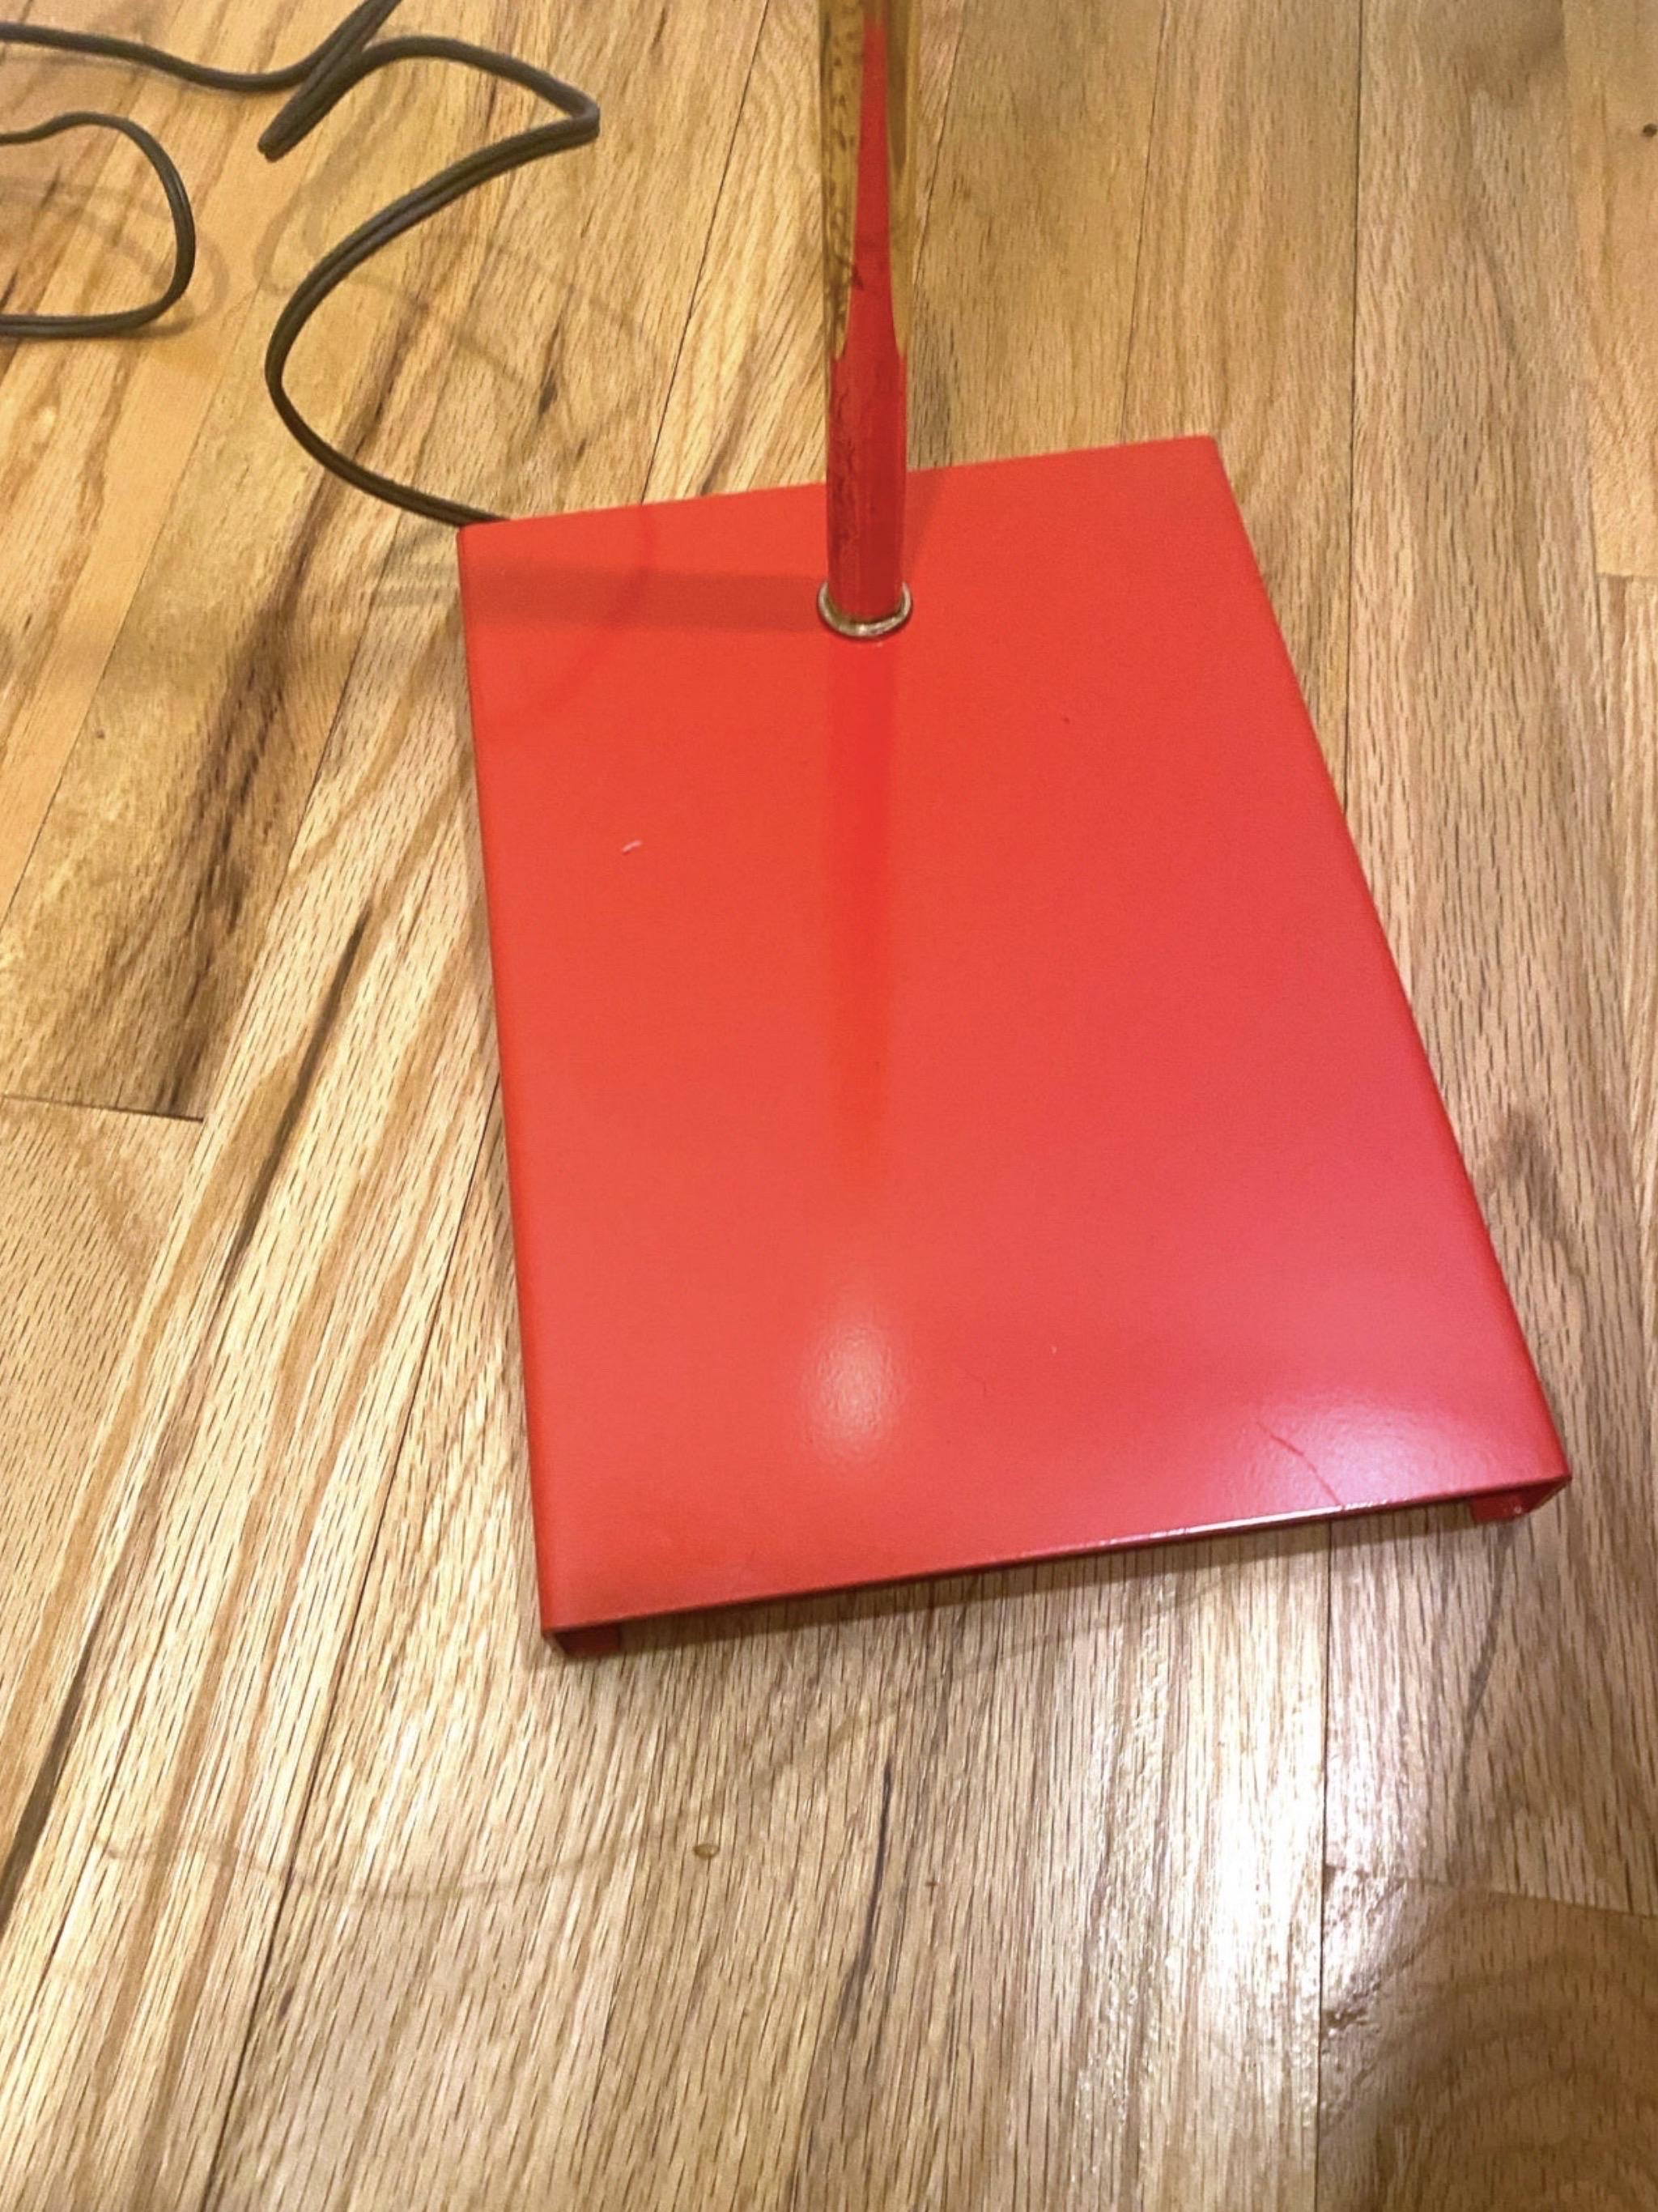 This bright red floor lamp has an adjustable height, perforated bullet shade that swivels 360, brass toned metal body and bright red enamel rectangular base. This has American wiring and is much like a pharmacy lamp, but the coolest pharmacy lamp